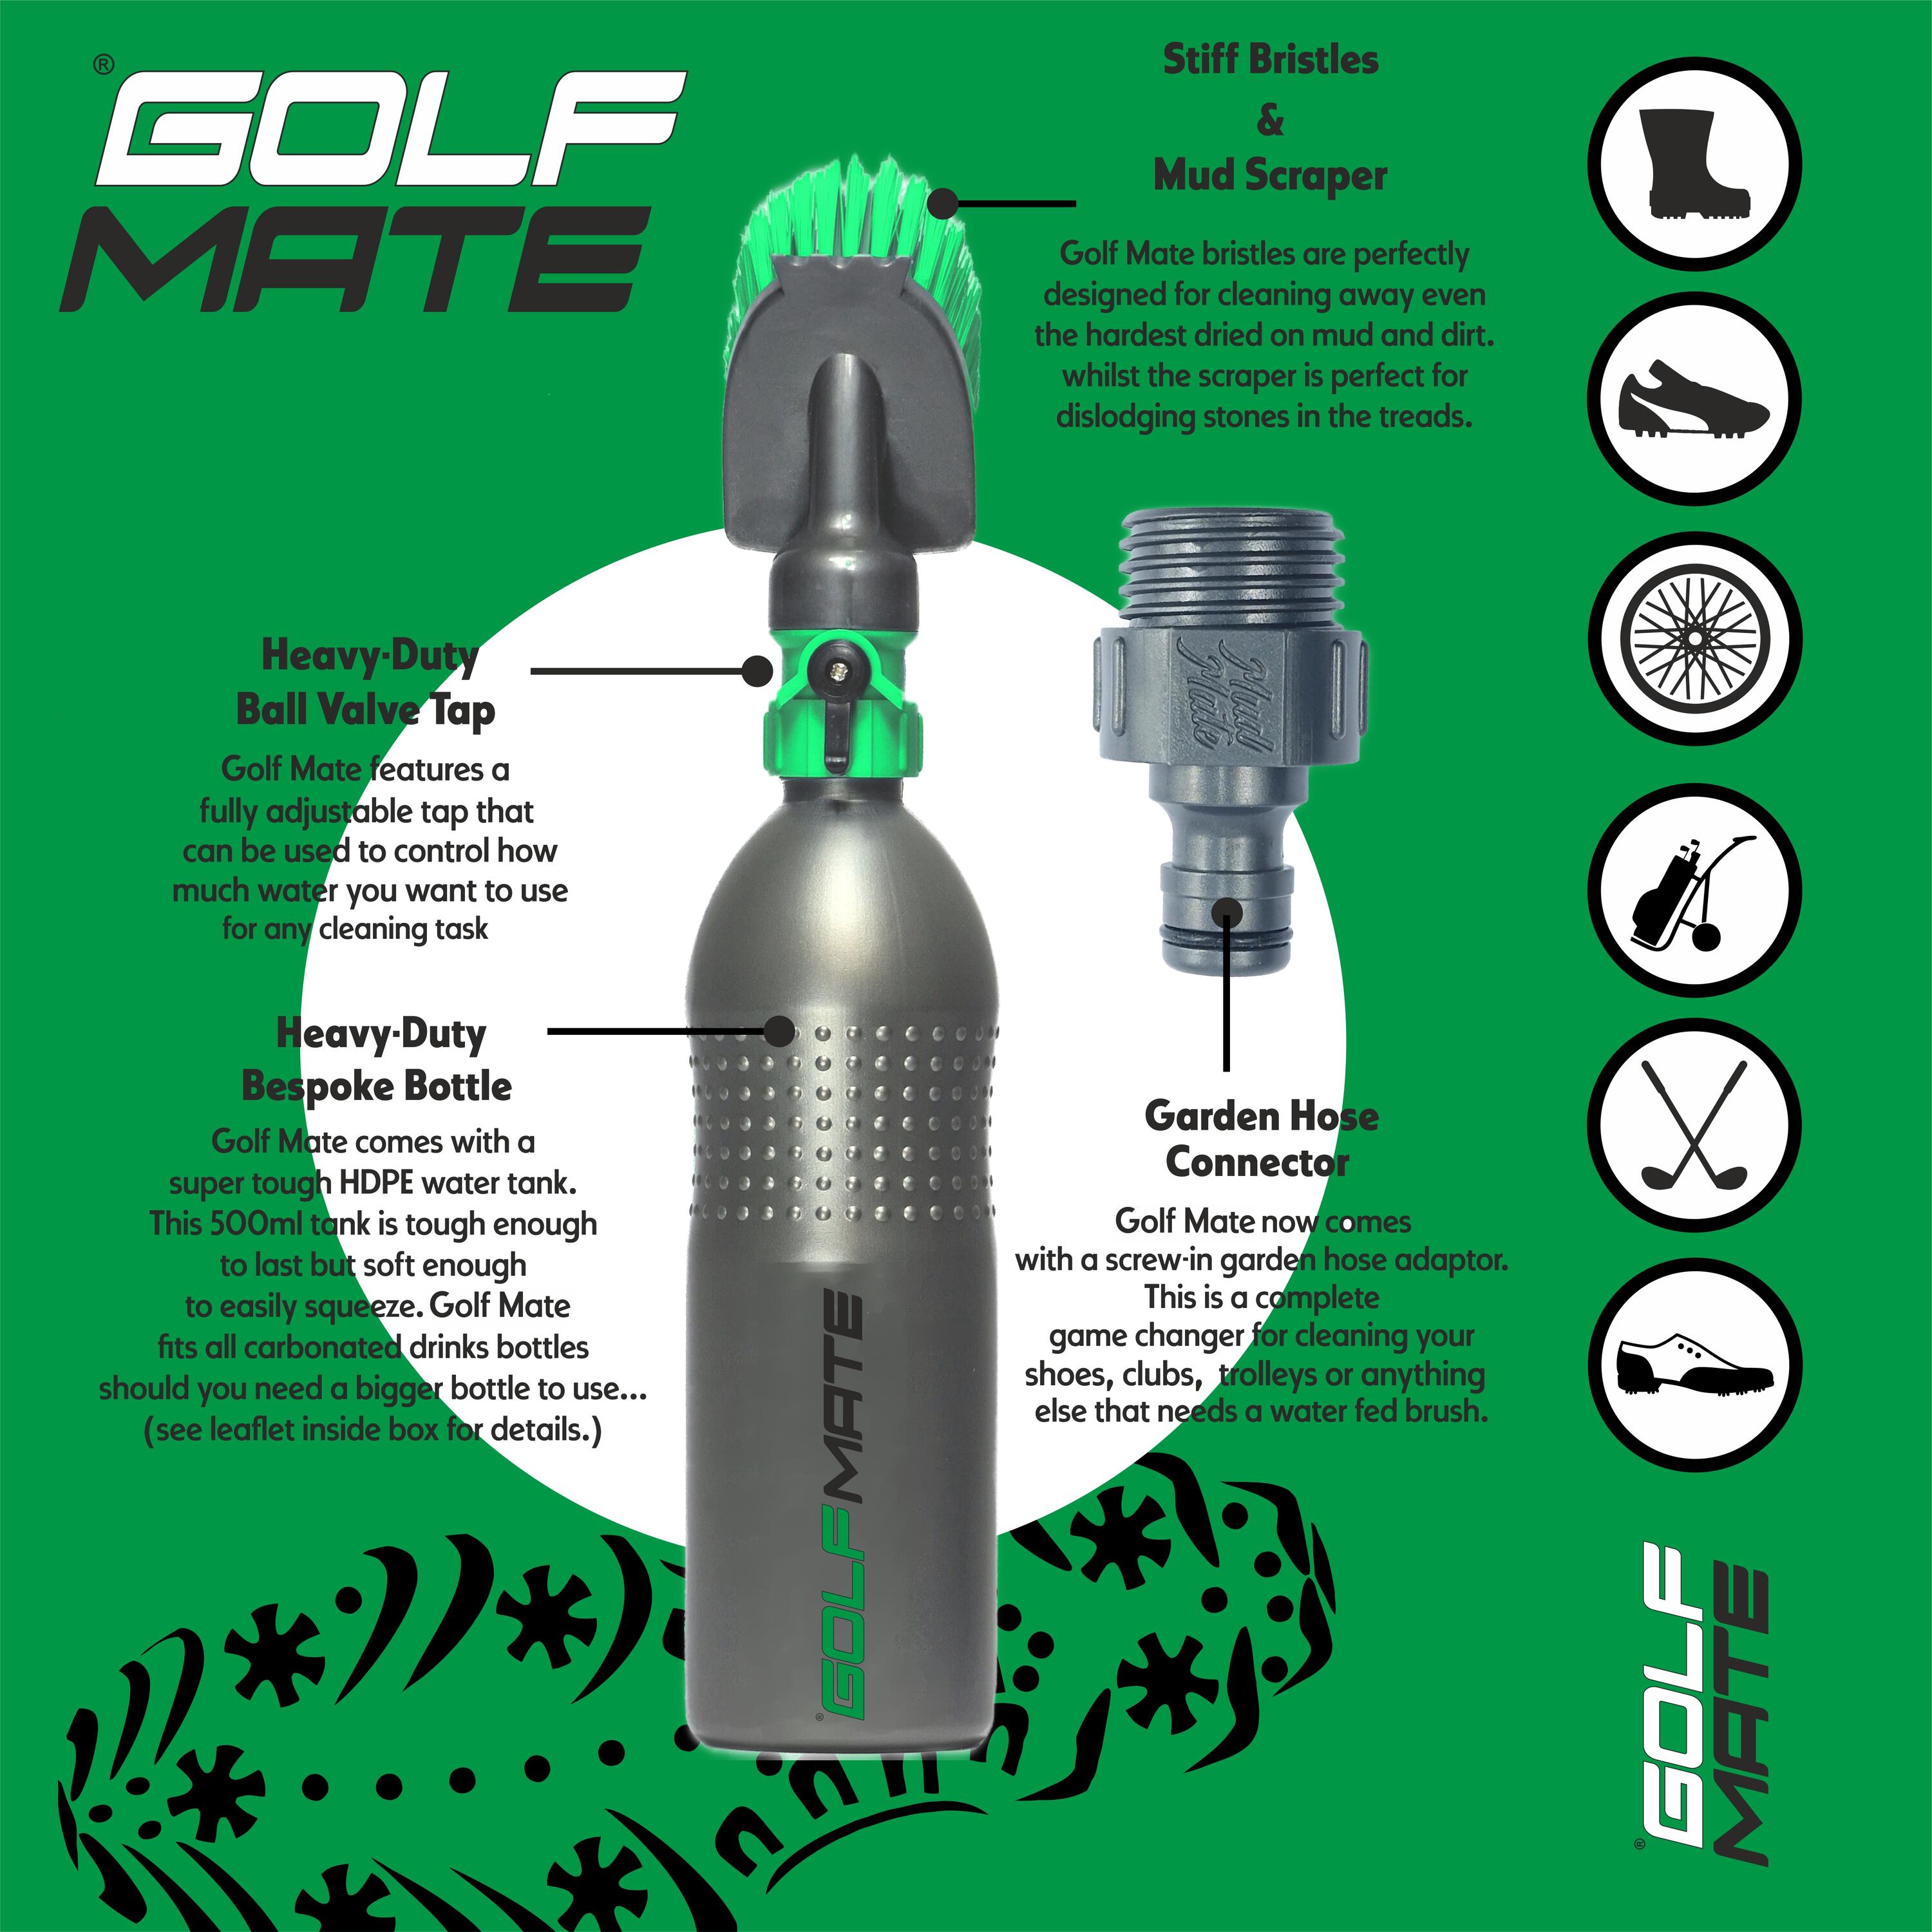 Golf Mate – The ultimate cleaning kit for golf shoes, clubs & trolley wheels. 2/8